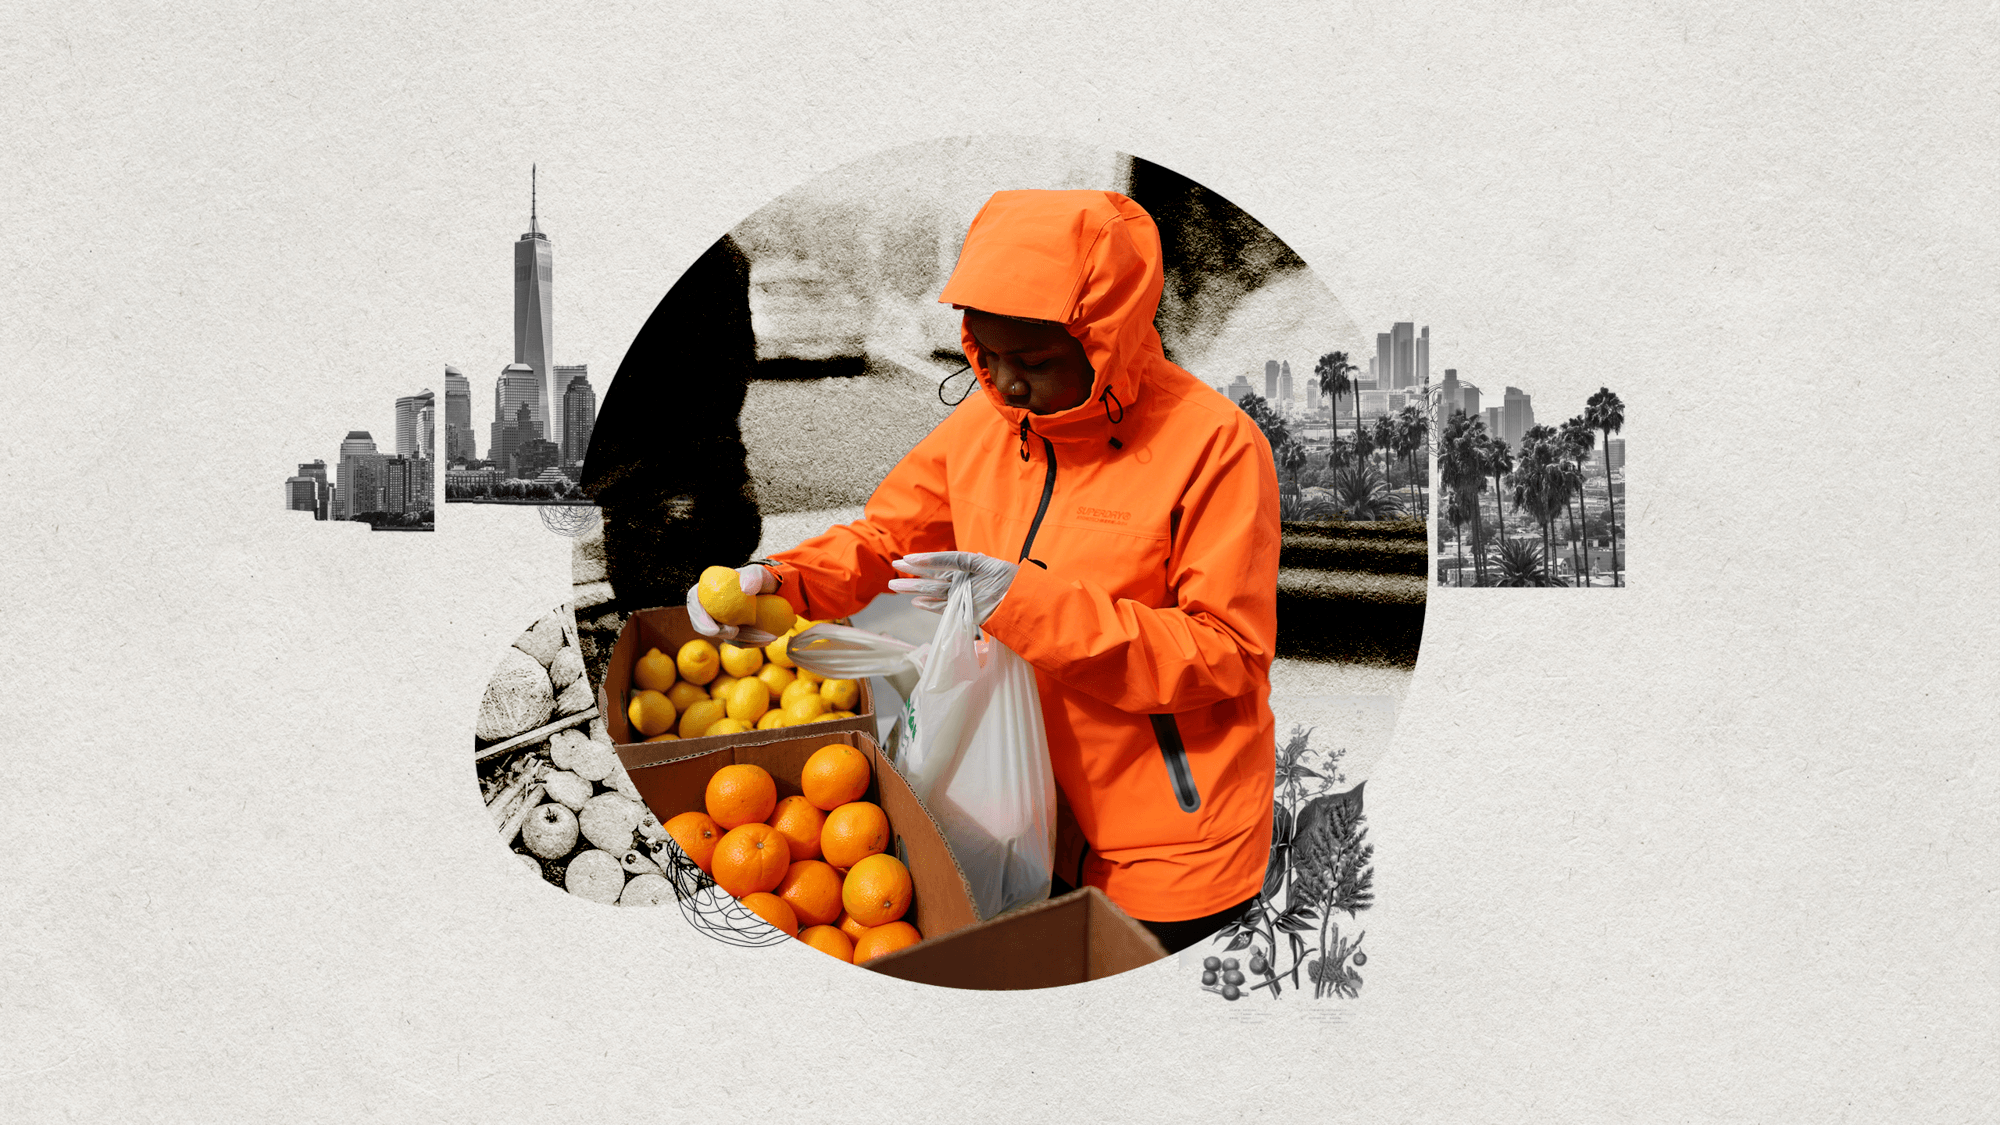 women in orange jacket picking up oranges surrounded by city skylines and food 110421.